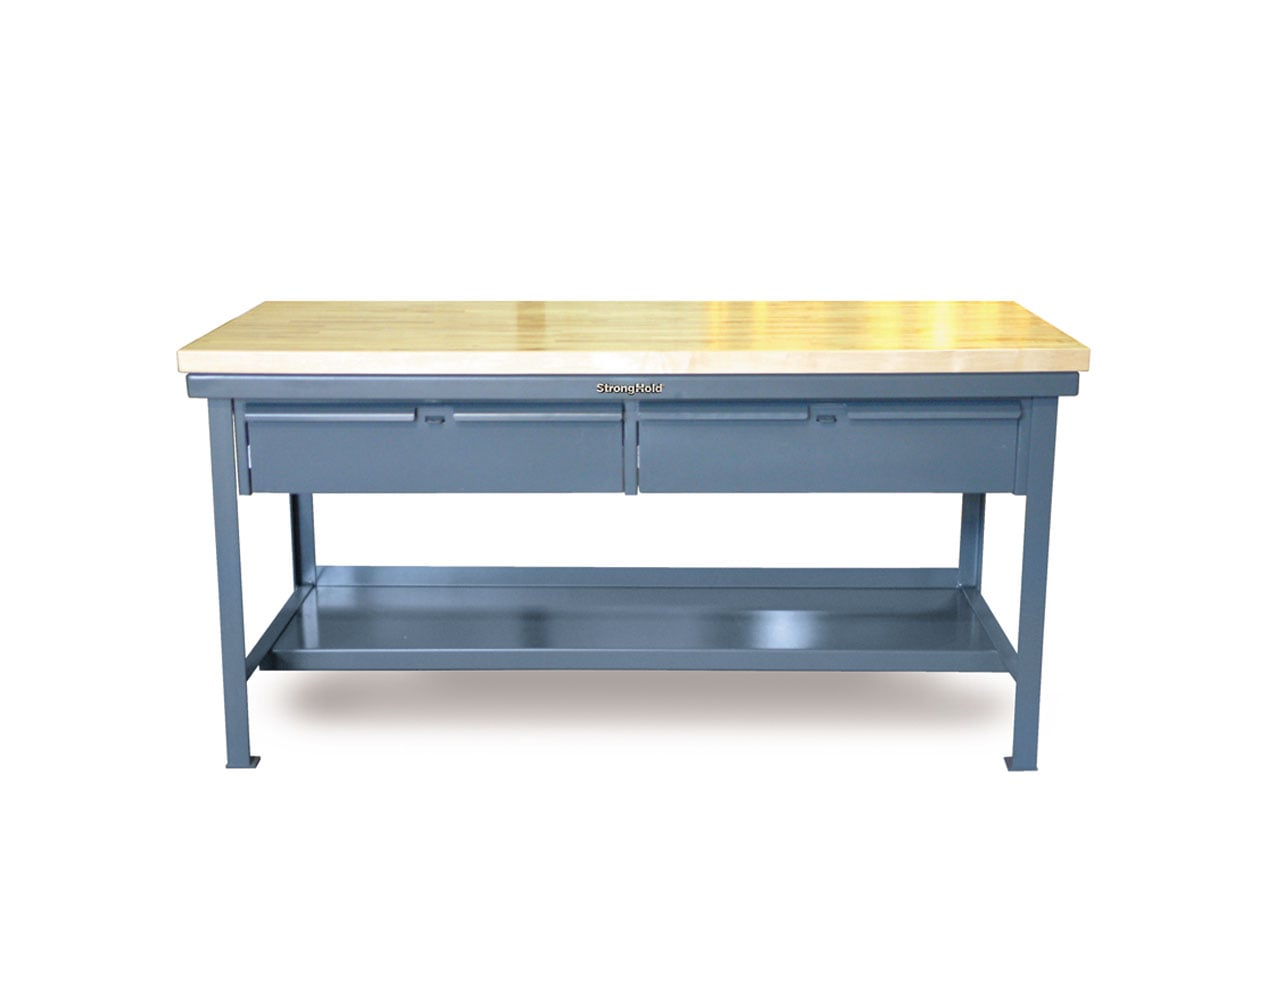 Extreme Duty 7 GA Shop Table with 1 3/4 in. Maple Top, 2 Drawers, 1 Shelf - 96 In. W x 36 In. D x 34 In. H